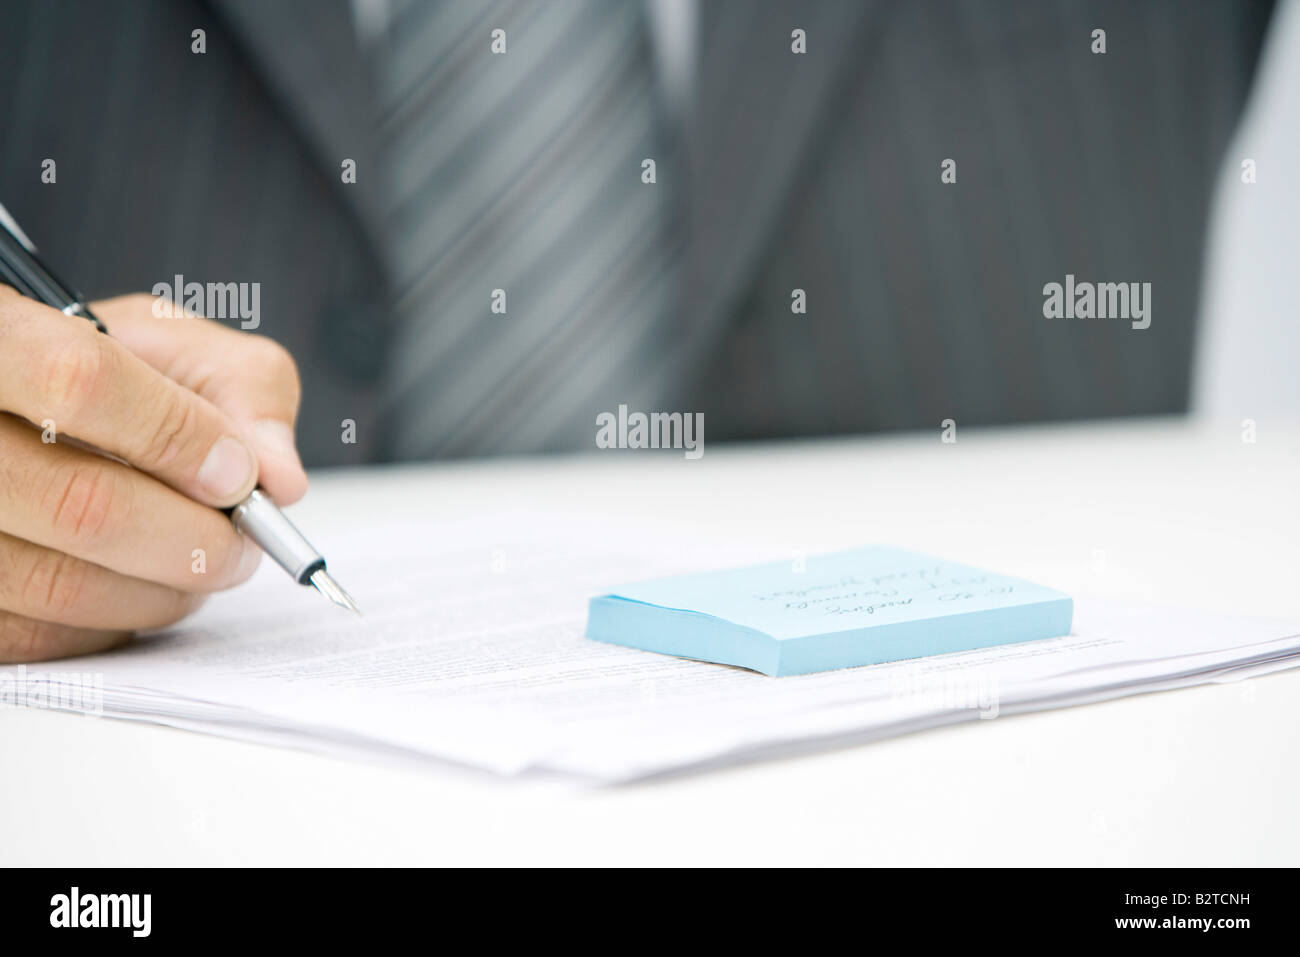 Man with adhesive note and document, holding pen, cropped view Stock Photo